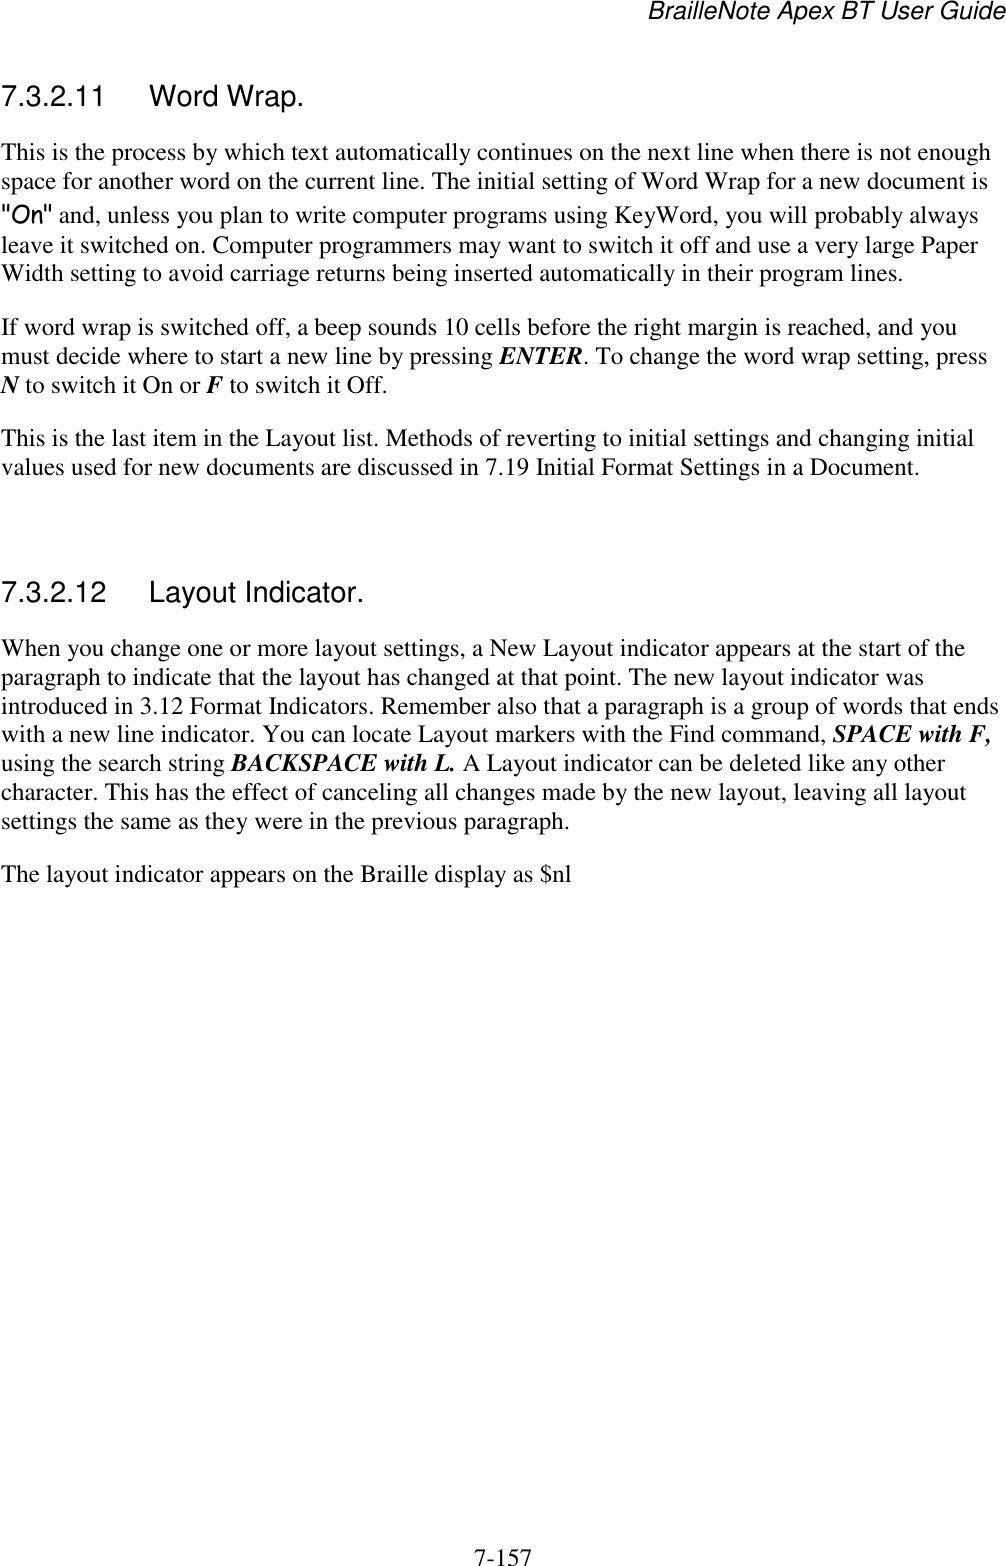 BrailleNote Apex BT User Guide   7-157   7.3.2.11  Word Wrap. This is the process by which text automatically continues on the next line when there is not enough space for another word on the current line. The initial setting of Word Wrap for a new document is &quot;On&quot; and, unless you plan to write computer programs using KeyWord, you will probably always leave it switched on. Computer programmers may want to switch it off and use a very large Paper Width setting to avoid carriage returns being inserted automatically in their program lines. If word wrap is switched off, a beep sounds 10 cells before the right margin is reached, and you must decide where to start a new line by pressing ENTER. To change the word wrap setting, press N to switch it On or F to switch it Off. This is the last item in the Layout list. Methods of reverting to initial settings and changing initial values used for new documents are discussed in 7.19 Initial Format Settings in a Document.   7.3.2.12  Layout Indicator. When you change one or more layout settings, a New Layout indicator appears at the start of the paragraph to indicate that the layout has changed at that point. The new layout indicator was introduced in 3.12 Format Indicators. Remember also that a paragraph is a group of words that ends with a new line indicator. You can locate Layout markers with the Find command, SPACE with F, using the search string BACKSPACE with L. A Layout indicator can be deleted like any other character. This has the effect of canceling all changes made by the new layout, leaving all layout settings the same as they were in the previous paragraph. The layout indicator appears on the Braille display as $nl  